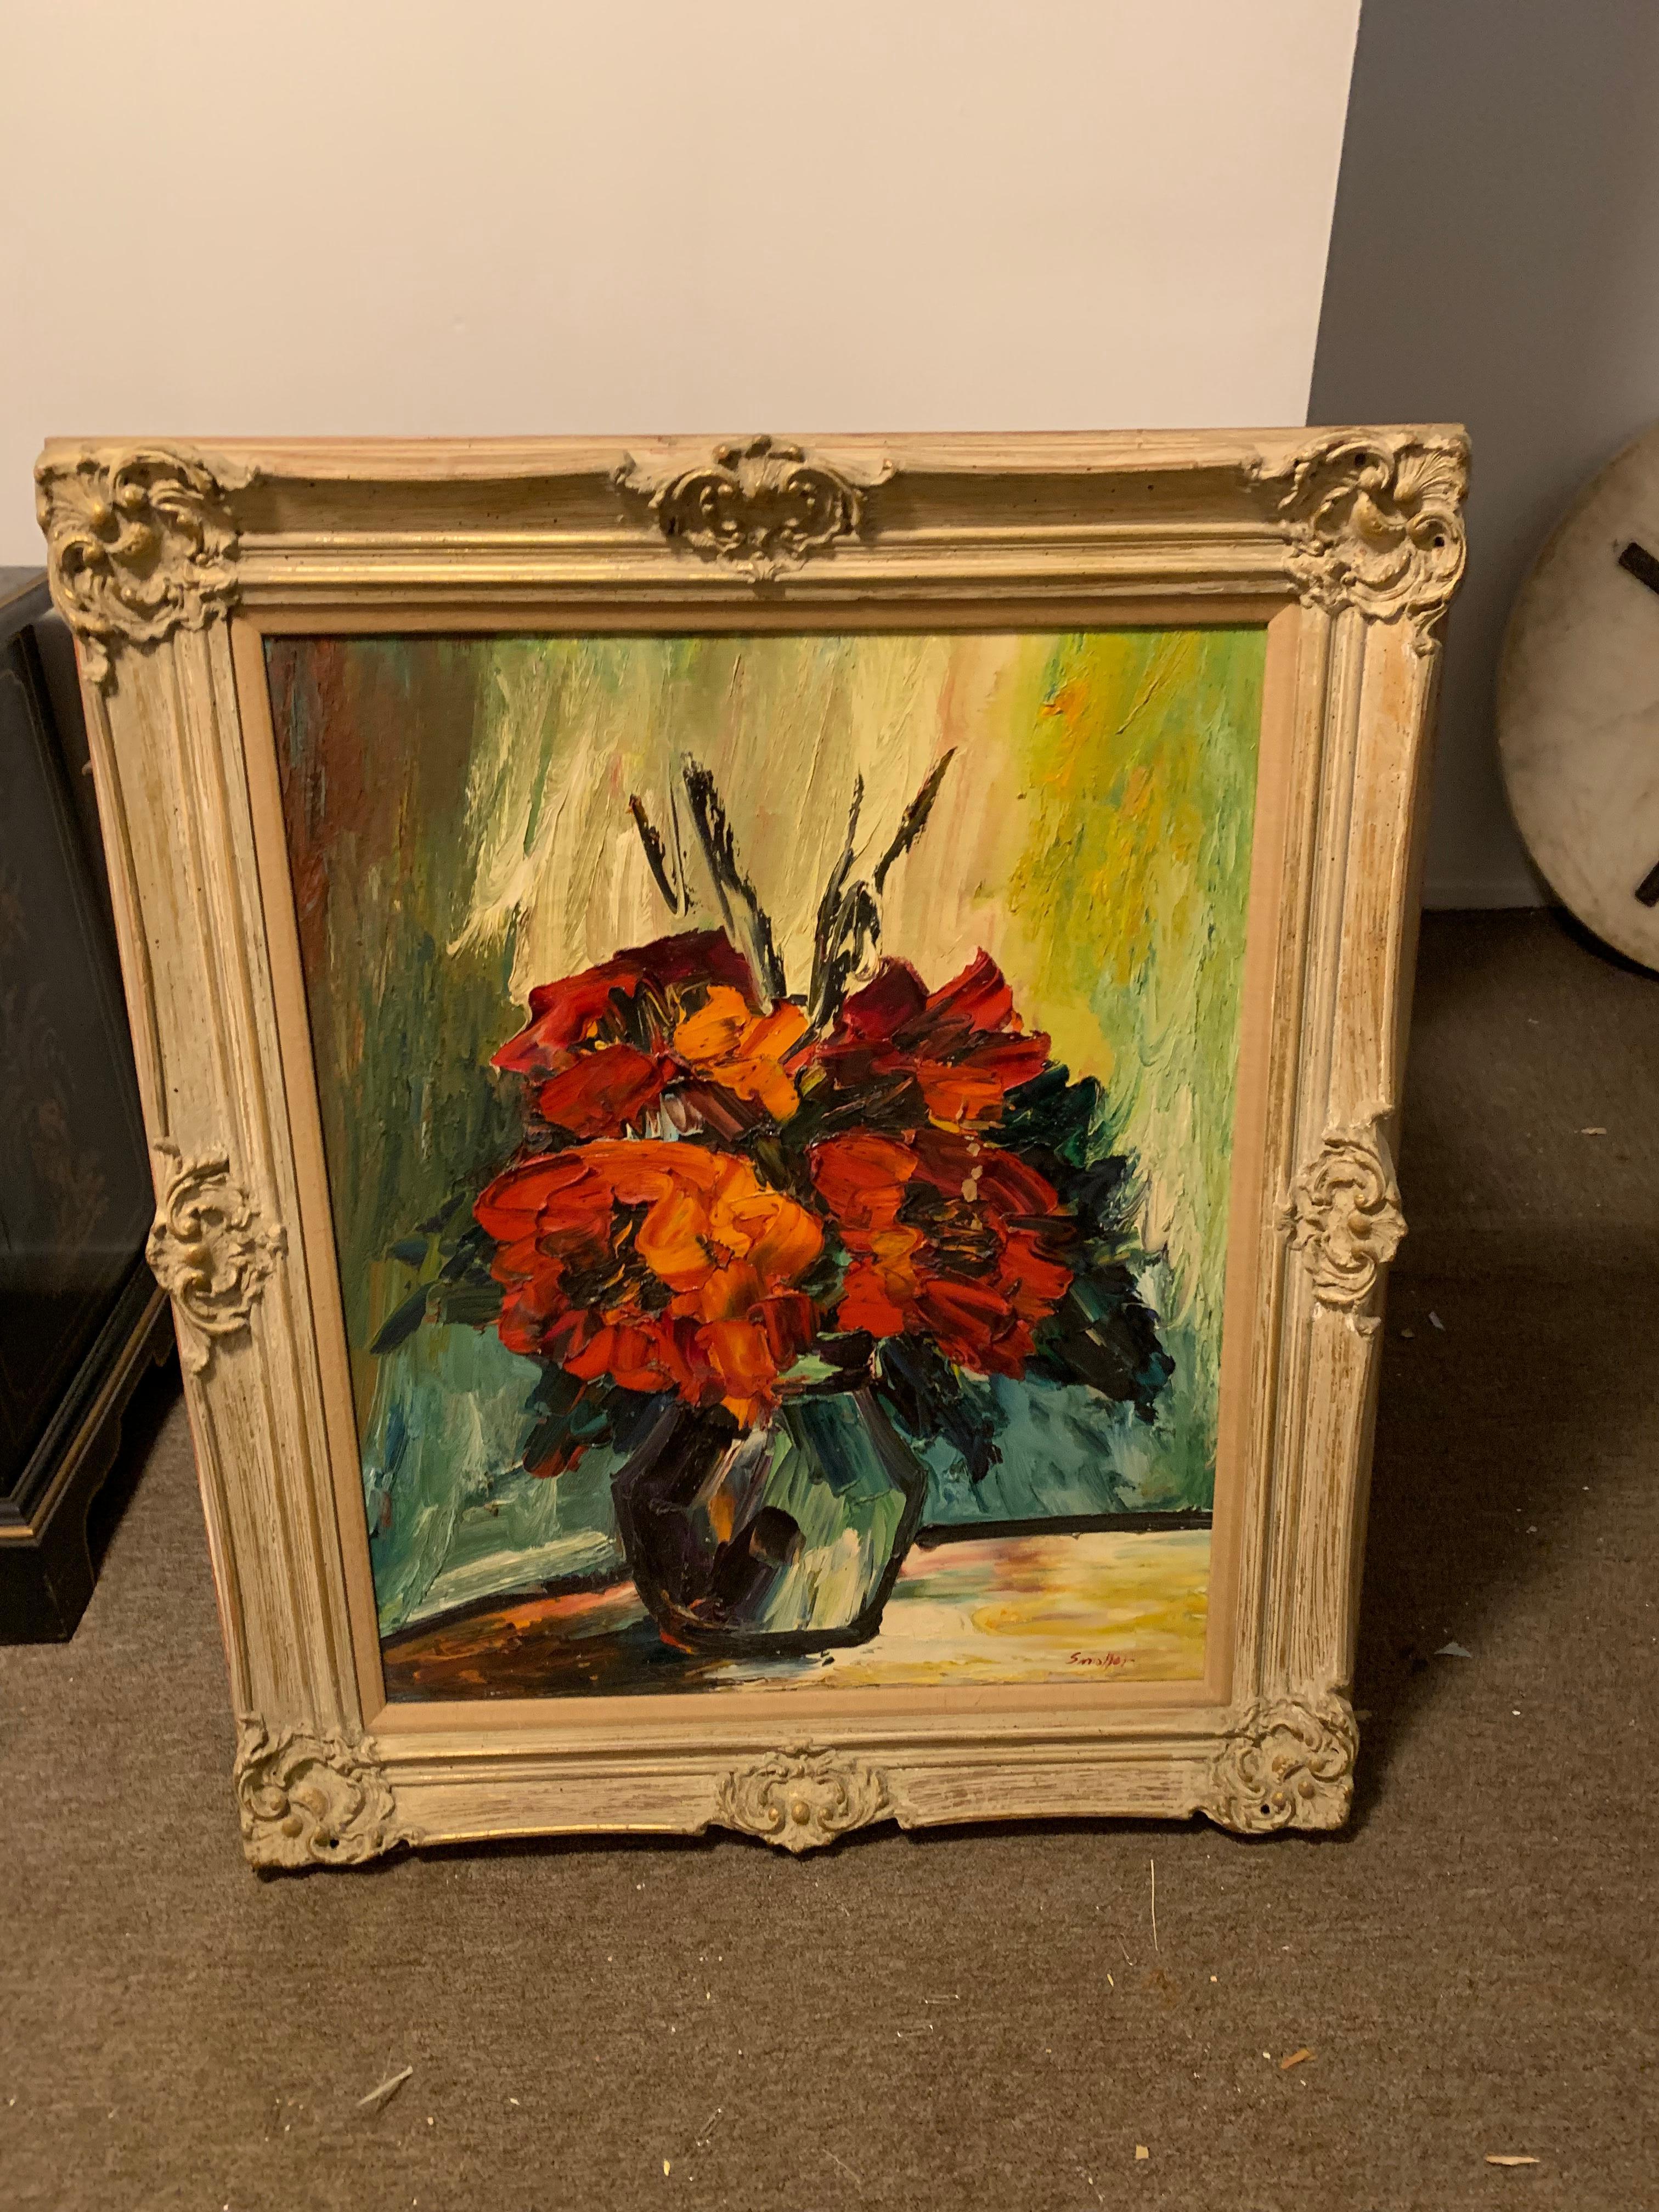 Listed American Artist, Irene Smoller*, Signed this Spectacular Still Life, Rich Red and Orange  Flowers in vase, an Original Oil on Large Canvas. Smoller was a mid century Expressionistic artist who is well known for her Floral pieces as well as